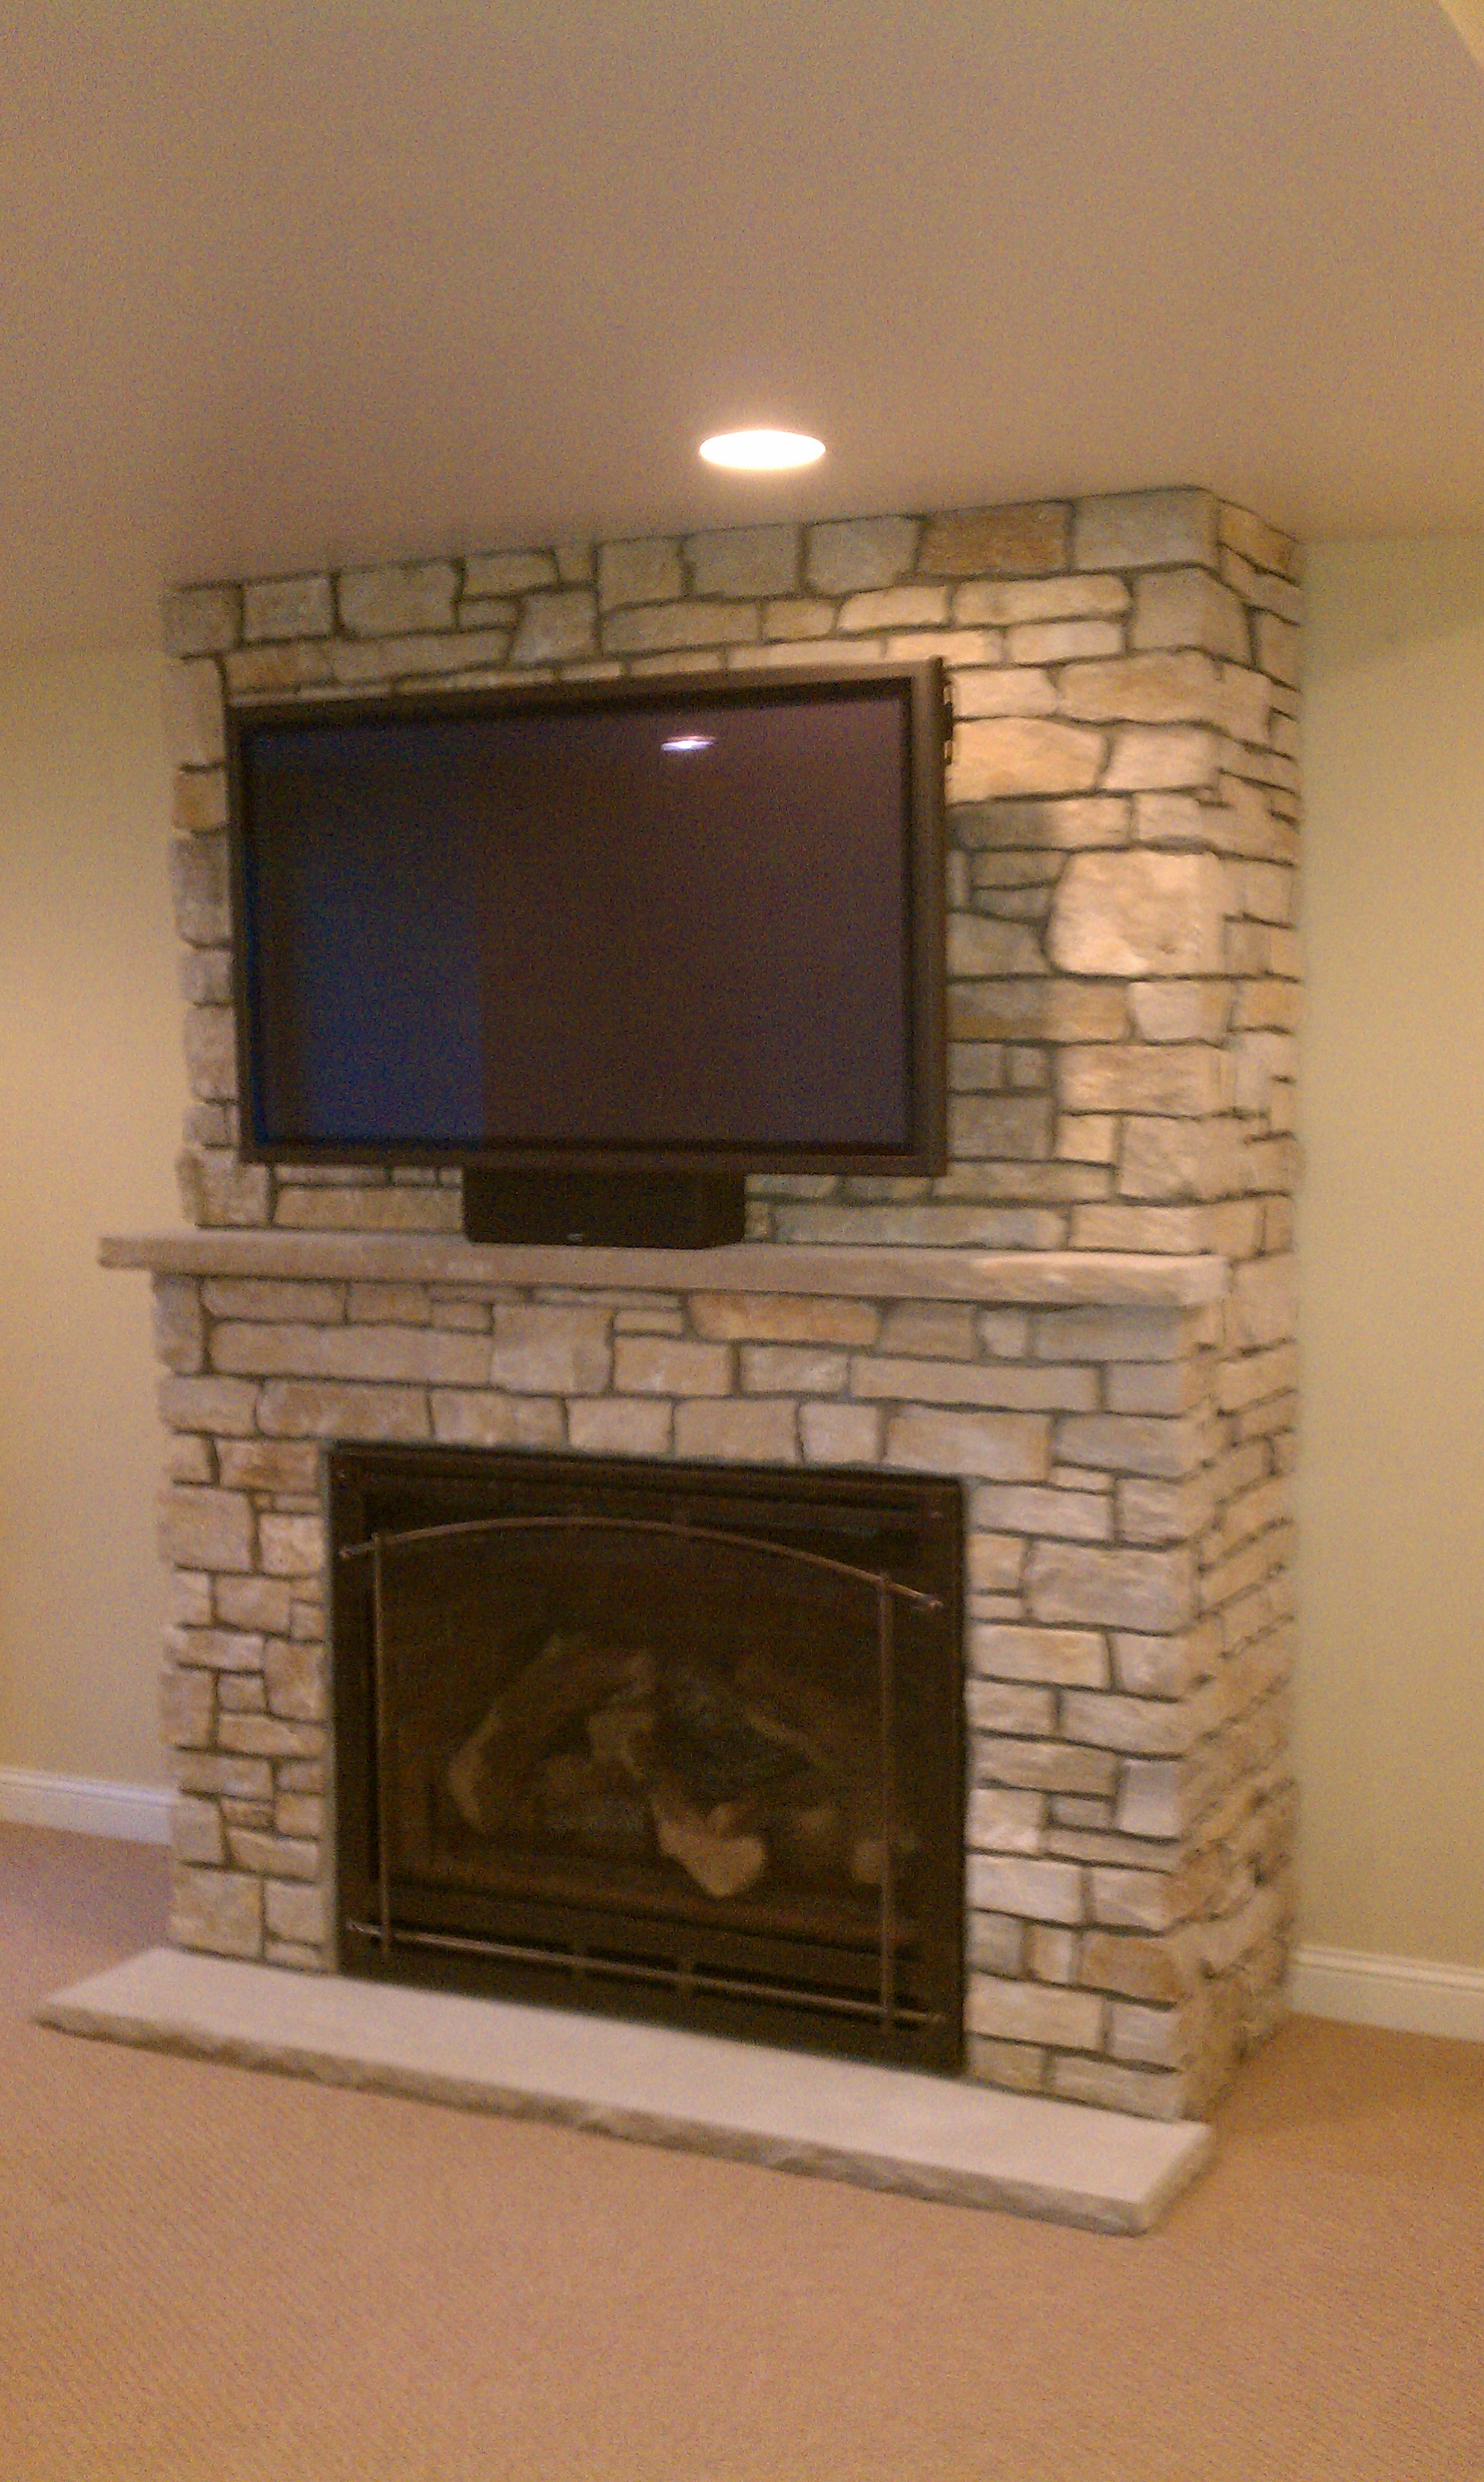 Tv Above Fireplace Mantel Fresh Interior Find Stone Fireplace Ideas Fits Perfectly to Your